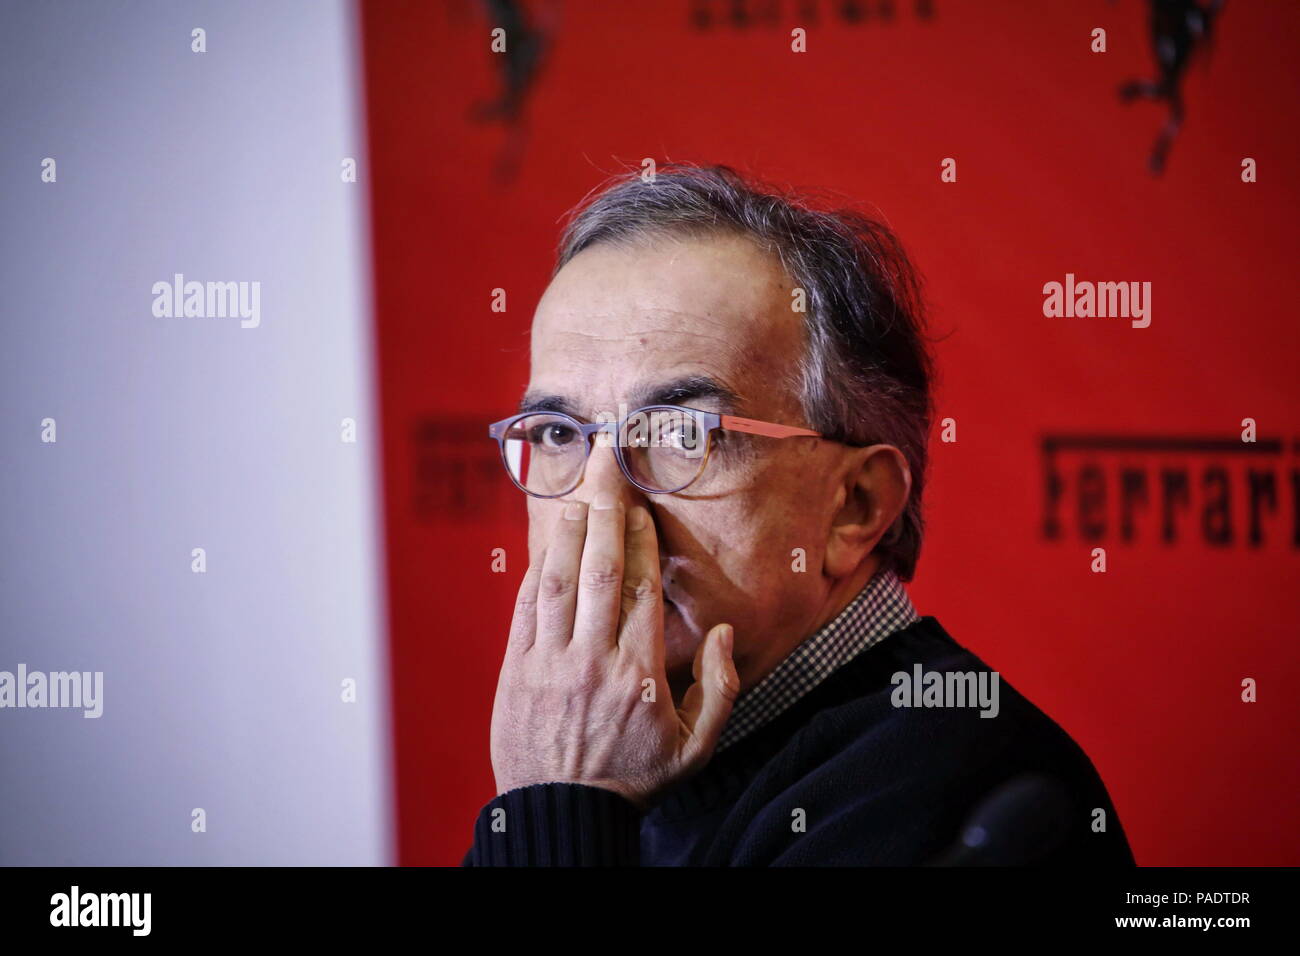 Milan, Italy - January 2016: Sergio Marchionne chief executive officer of FCA speaks during a news conference of Ferrari Stock Photo